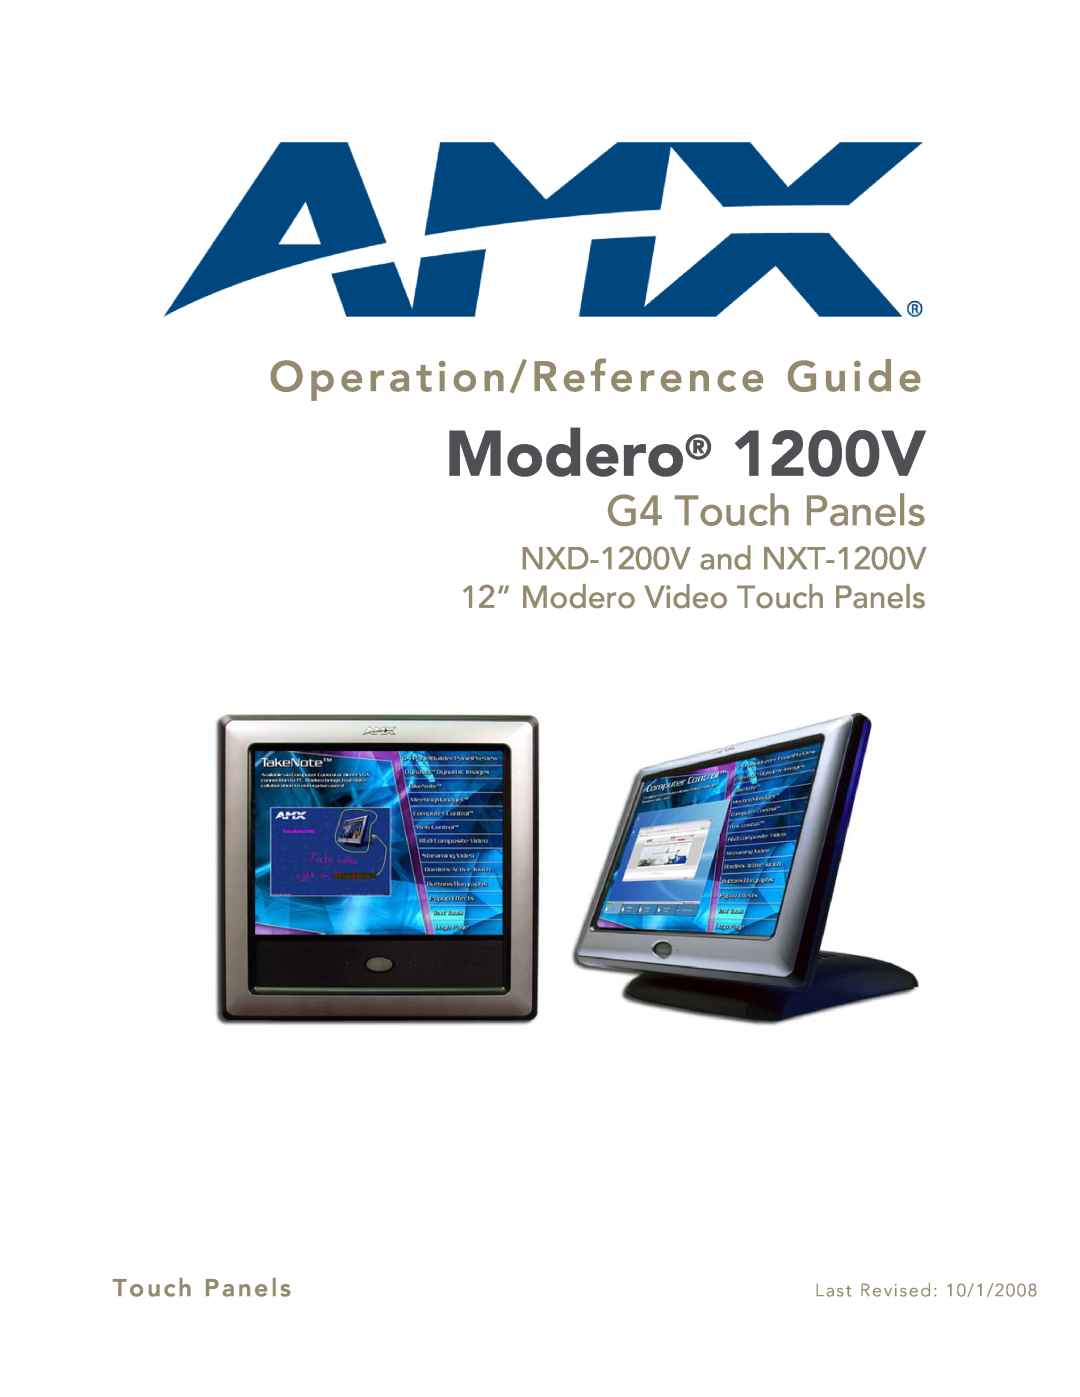 AMX NXT-1200V manual Modero, Operation/Reference Guide, G4 Touch Panels, Last Revised 10/1/2008 